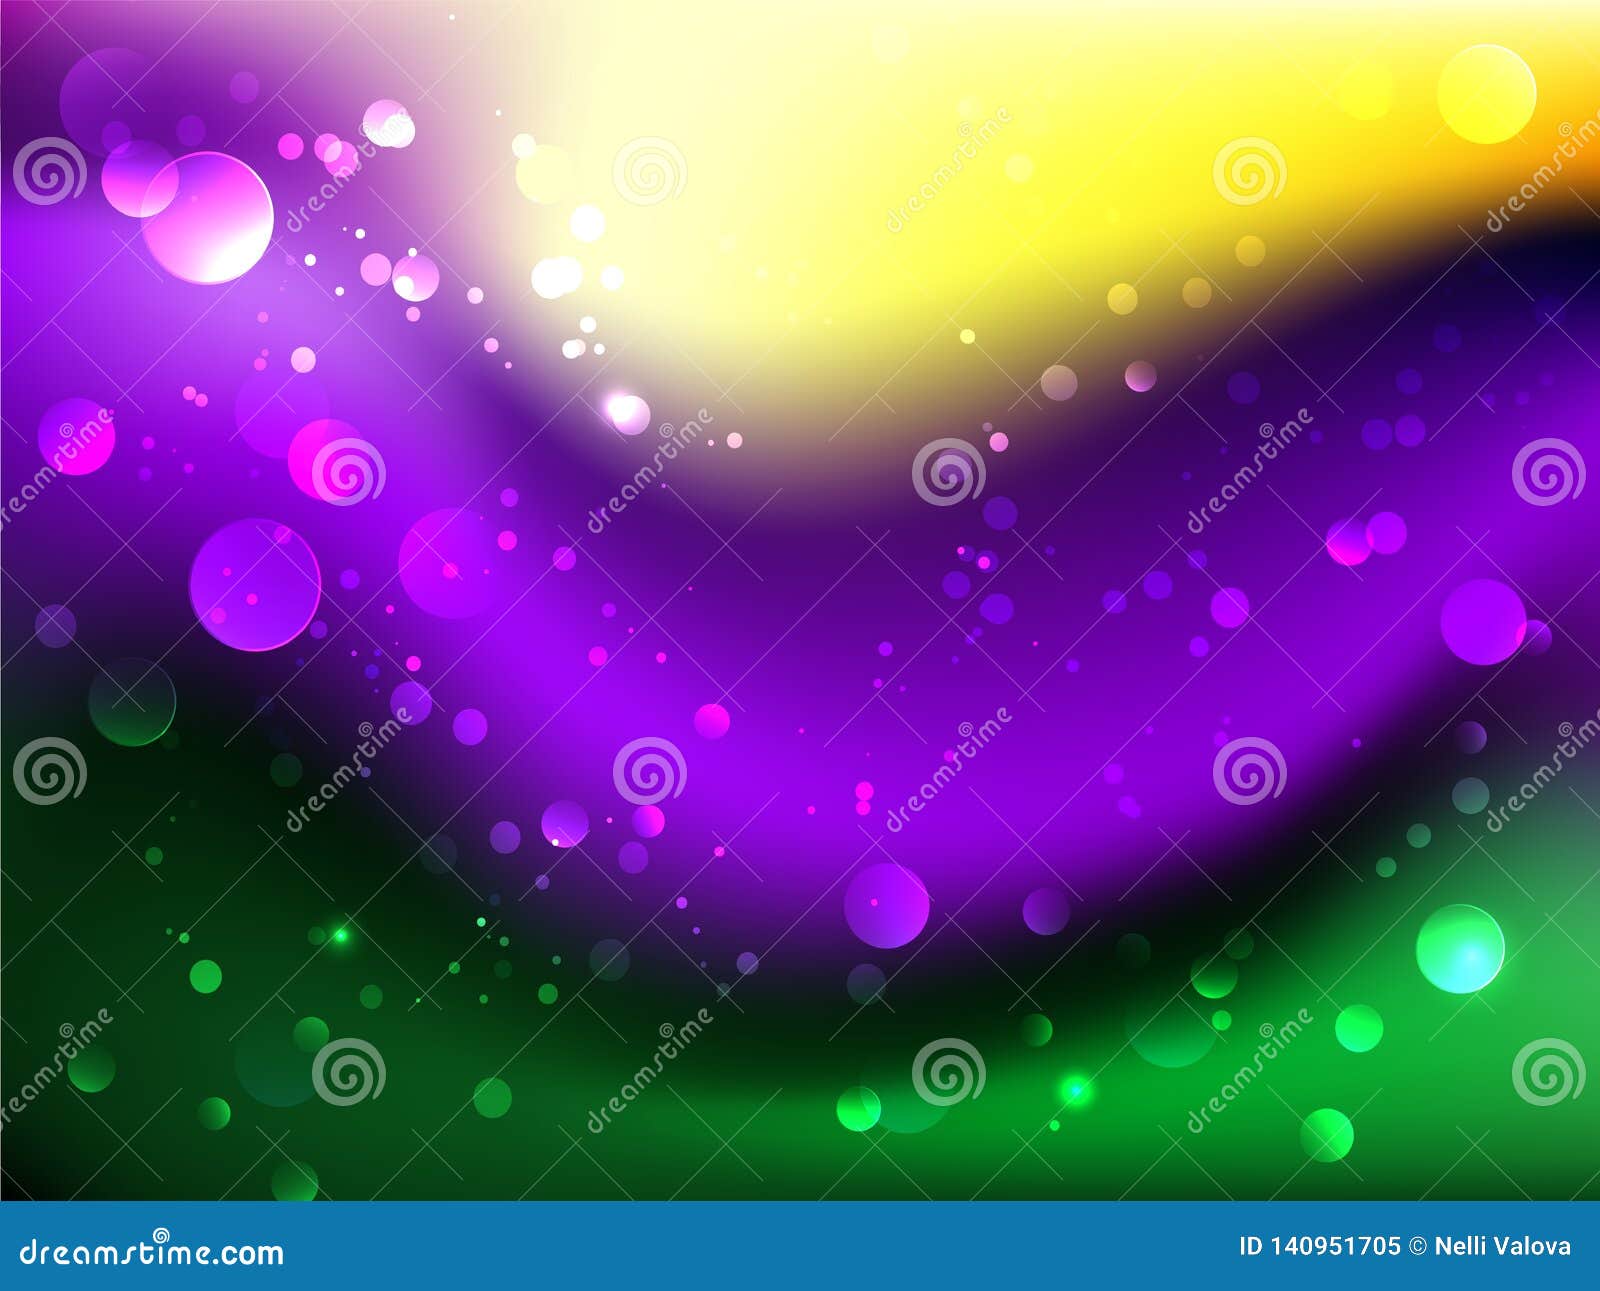 abstract mardi gras background abstract backround